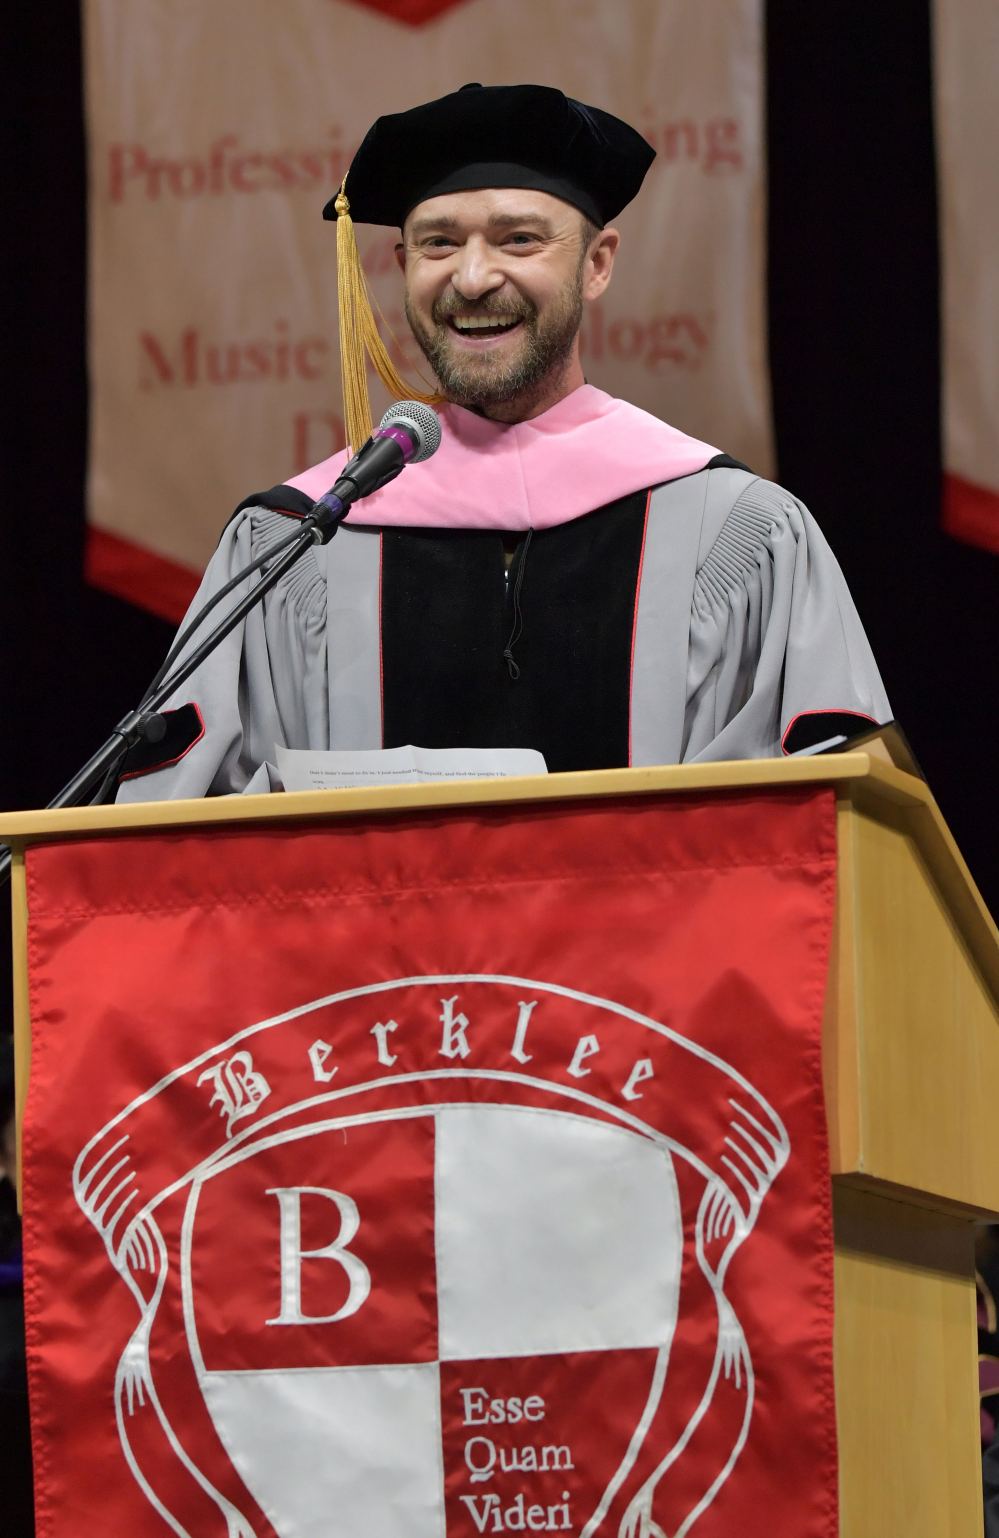 Justin Timberlake Receives Honorary Doctoral Degree from Berklee College of Music